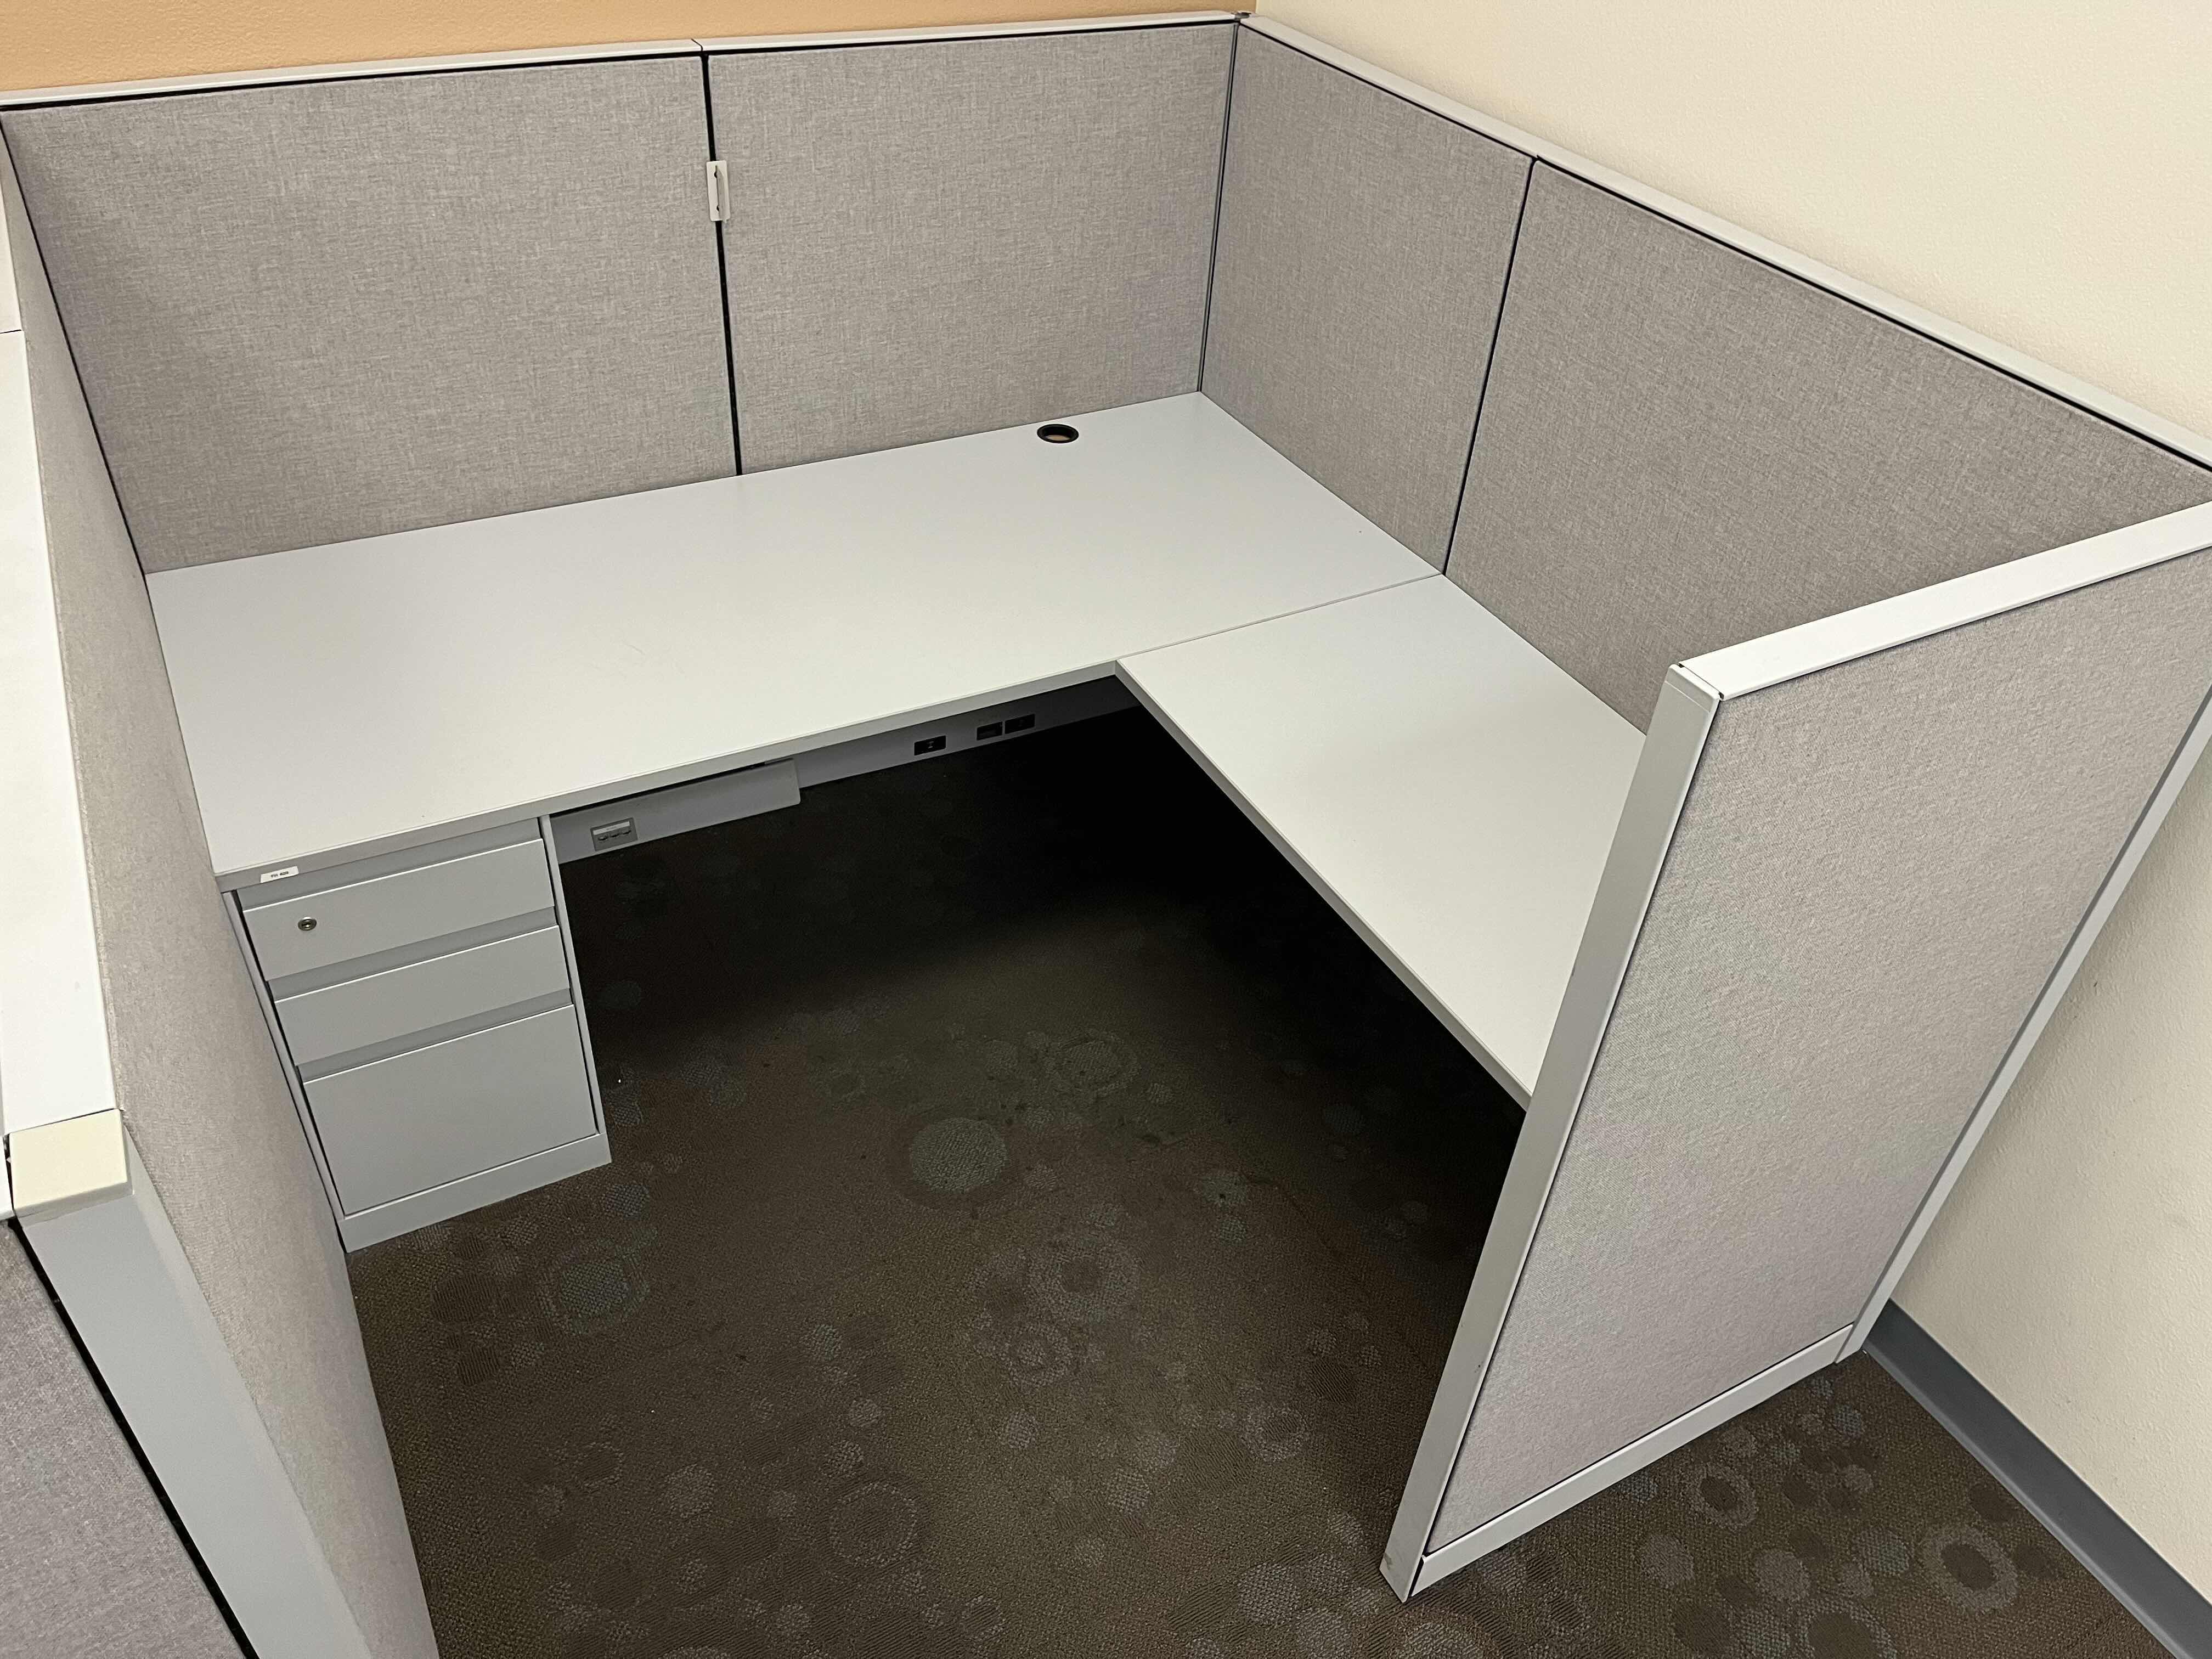 Photo 1 of STEELCASE BUILT IN CUBICLE L SHAPE 3 DRAWER OFFICE DESK 72” X 72” H27.5” W 4 CUBICLE PANELS 30.5”-42” X 54”